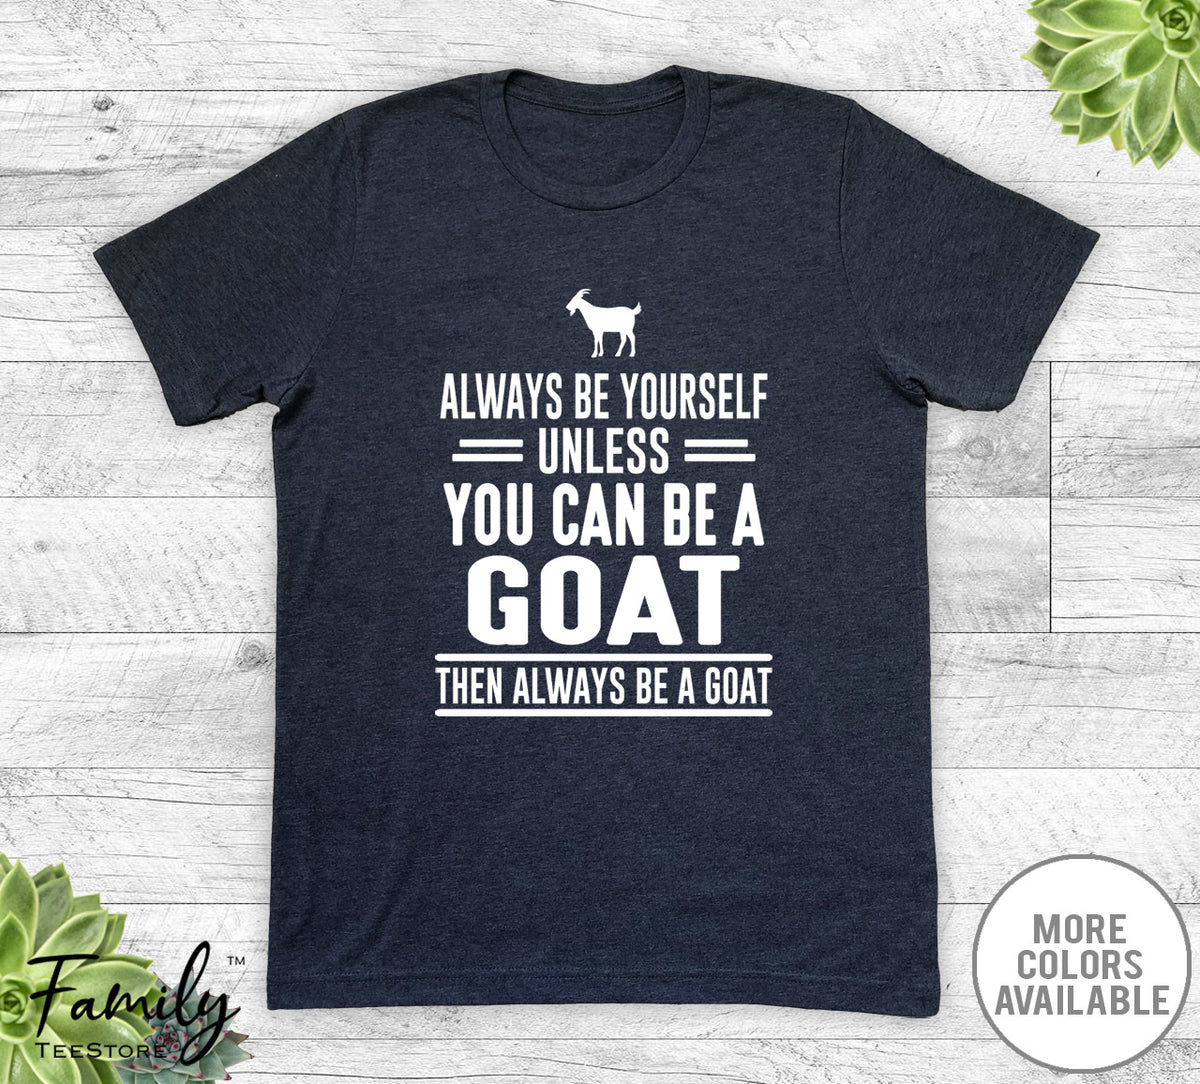 Always Be Yourself Unless You Can Be A Goat - Unisex T-shirt - Goat Shirt - Goat Gift - familyteeprints